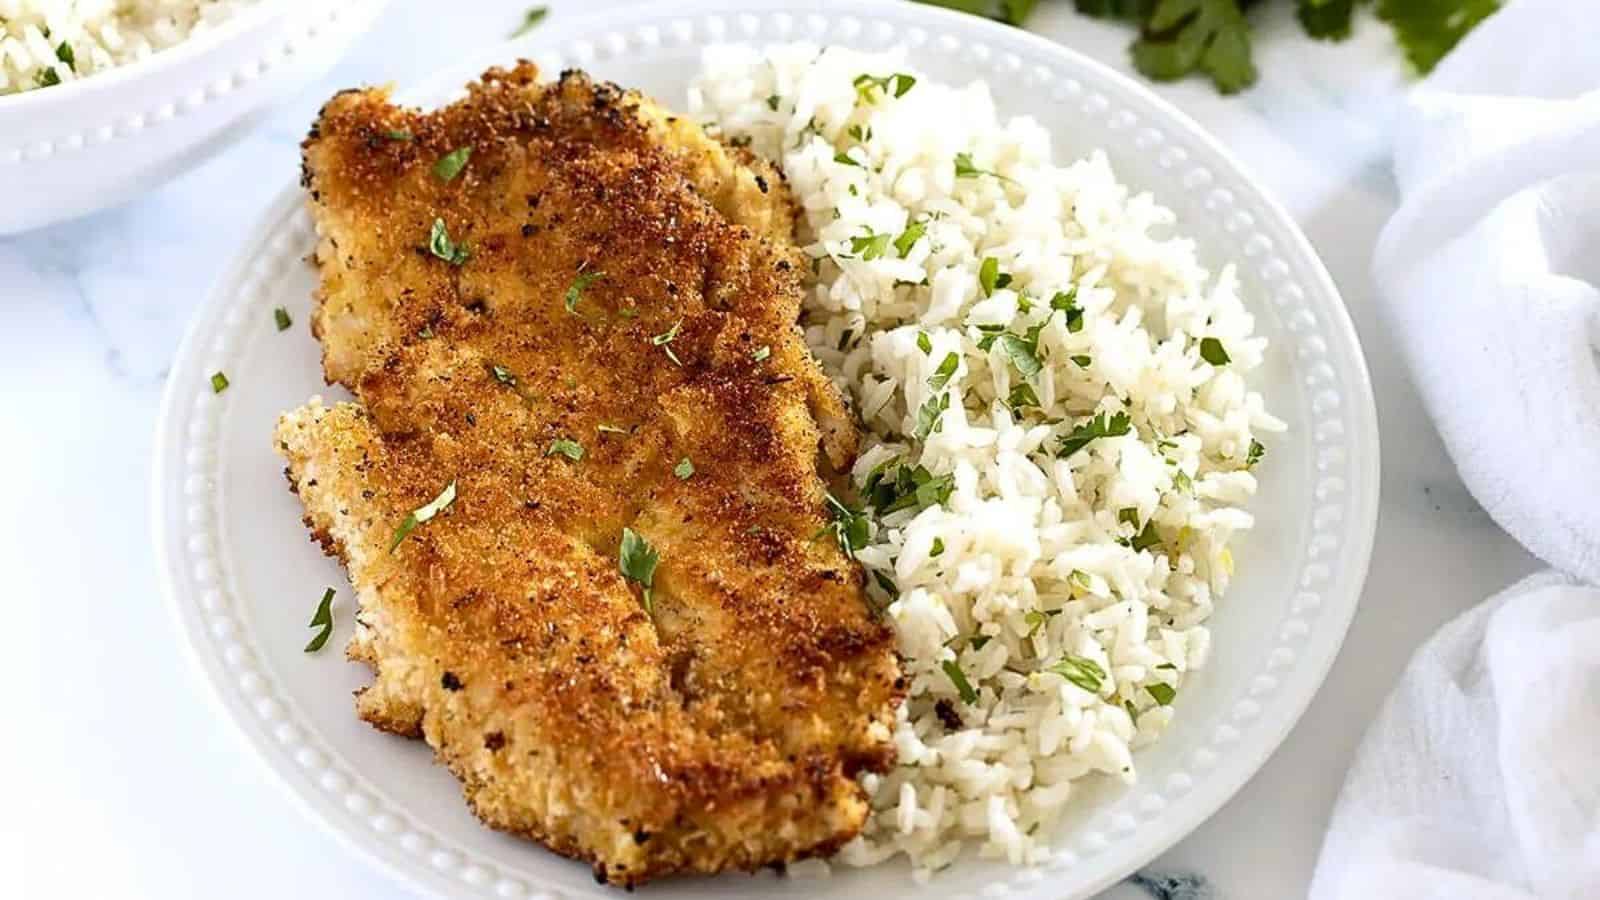 Milanesa de Pollo on a white plate with white rice and parsley flakes.